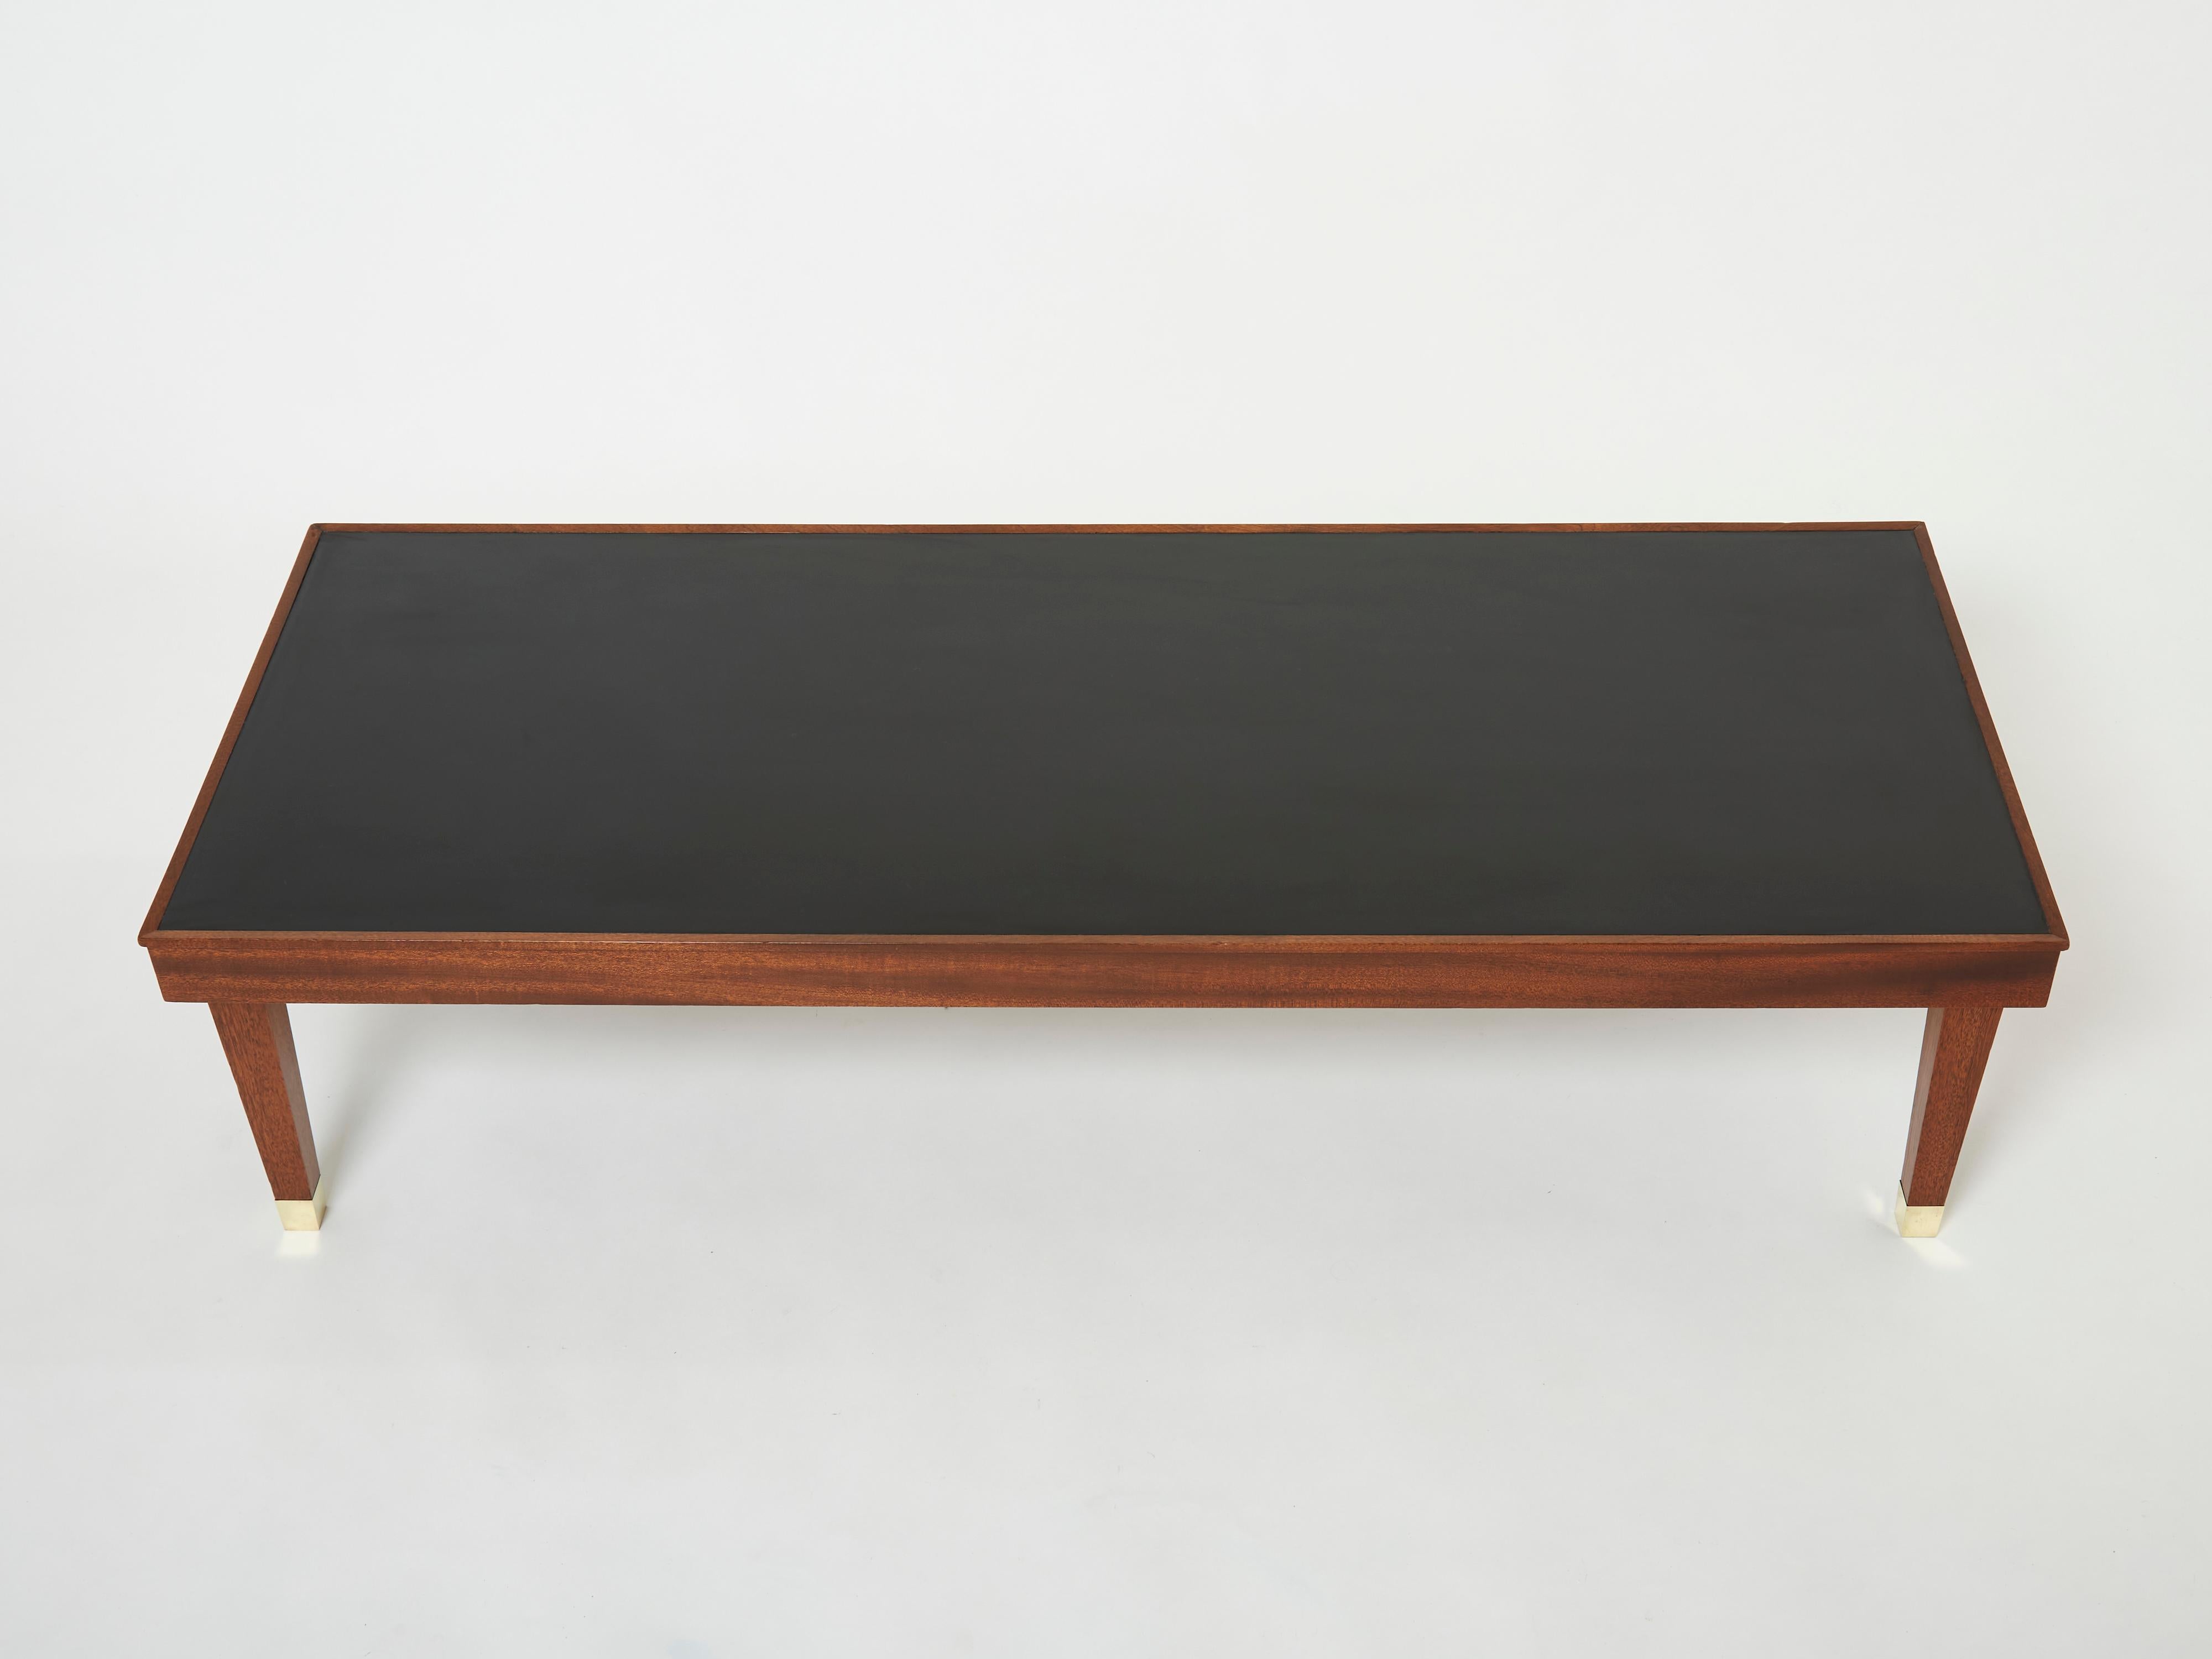 French Jacques Adnet Mahogany Brass Modernist Coffee Table, 1950s For Sale